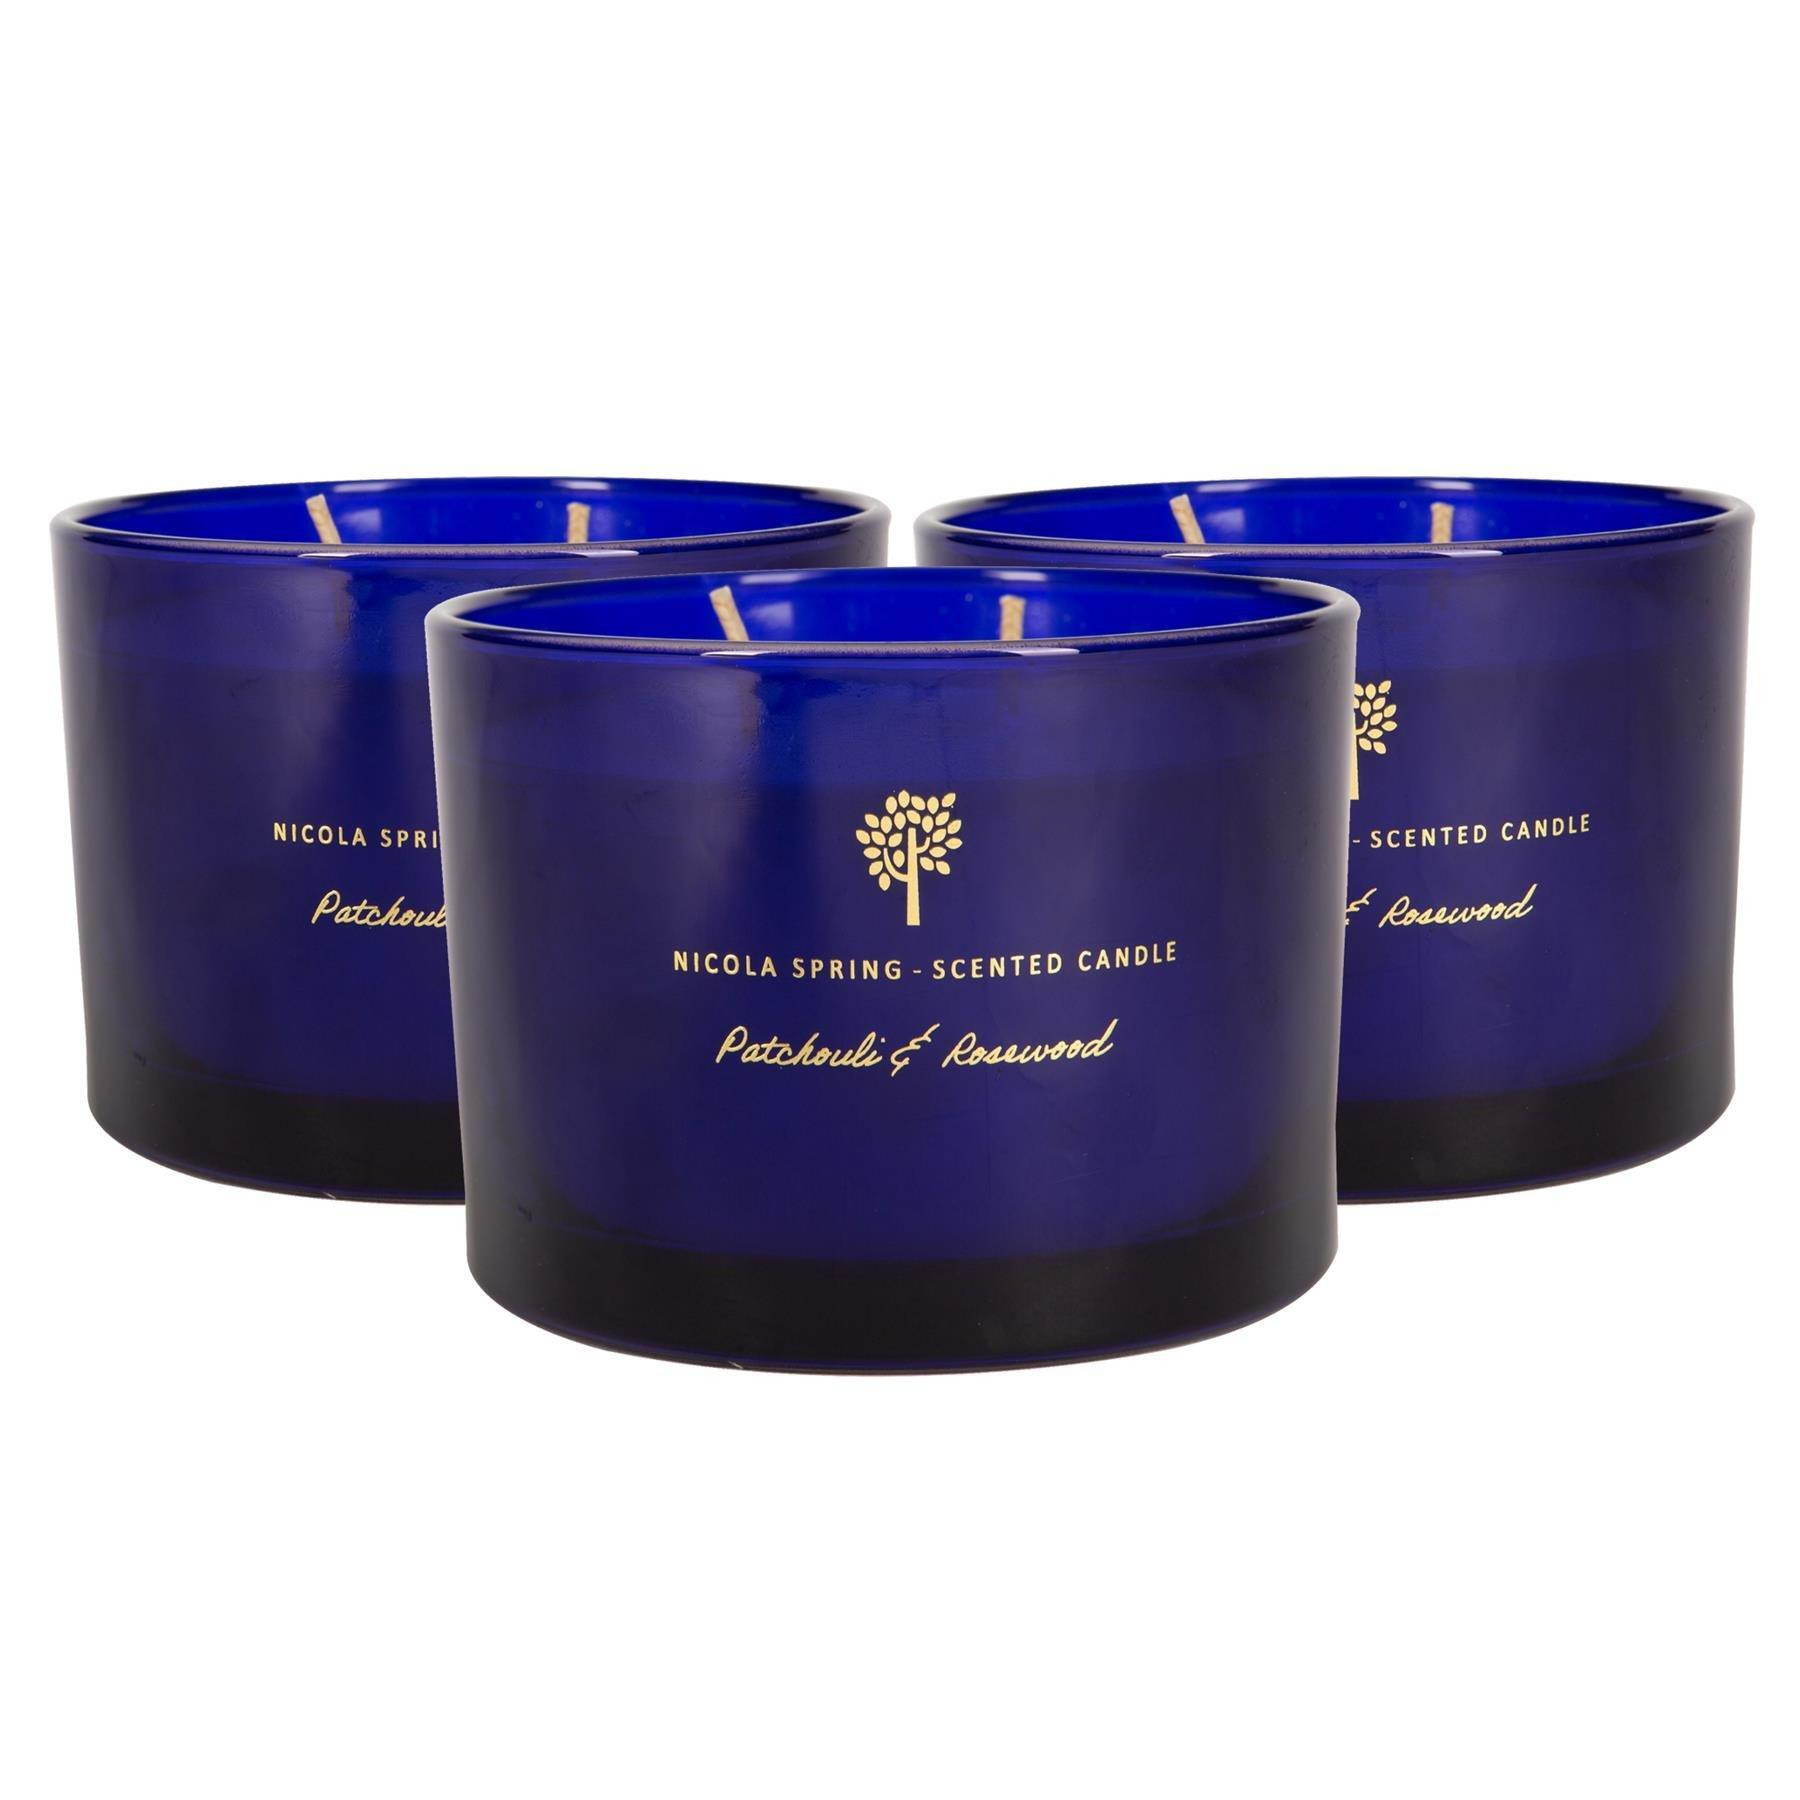 Soy Wax Scented Candles 350g Patchouli & Rosewood Pack of 3 - image 1